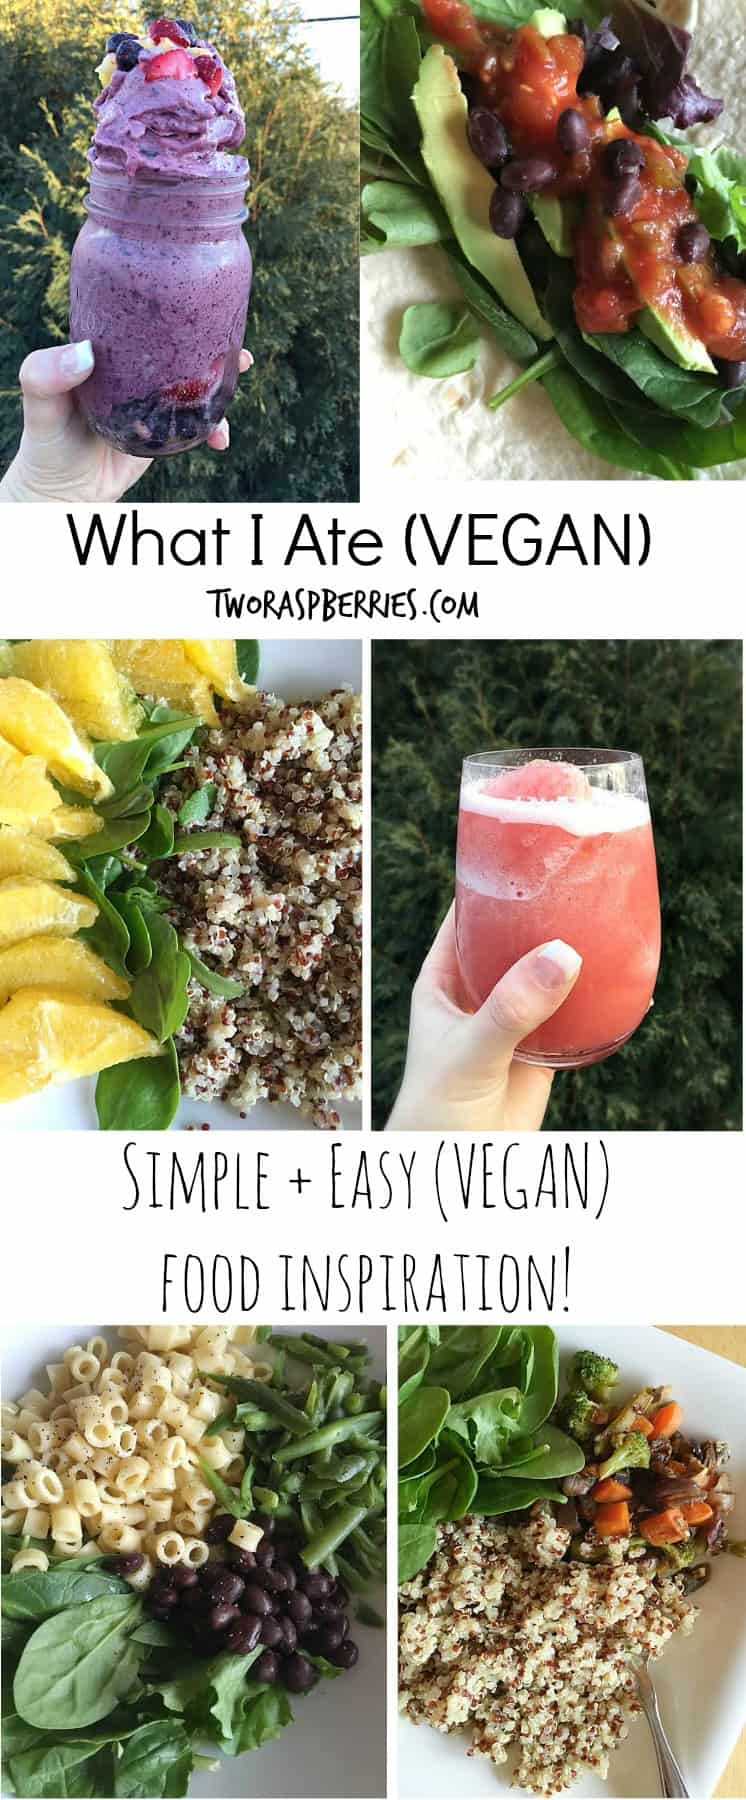 simple and easy food inspiration! "What I Ate" is easy to prepare things I ate this week to spark ideas for you! eating vegan doesn't need to be complicated / TwoRaspberries.com